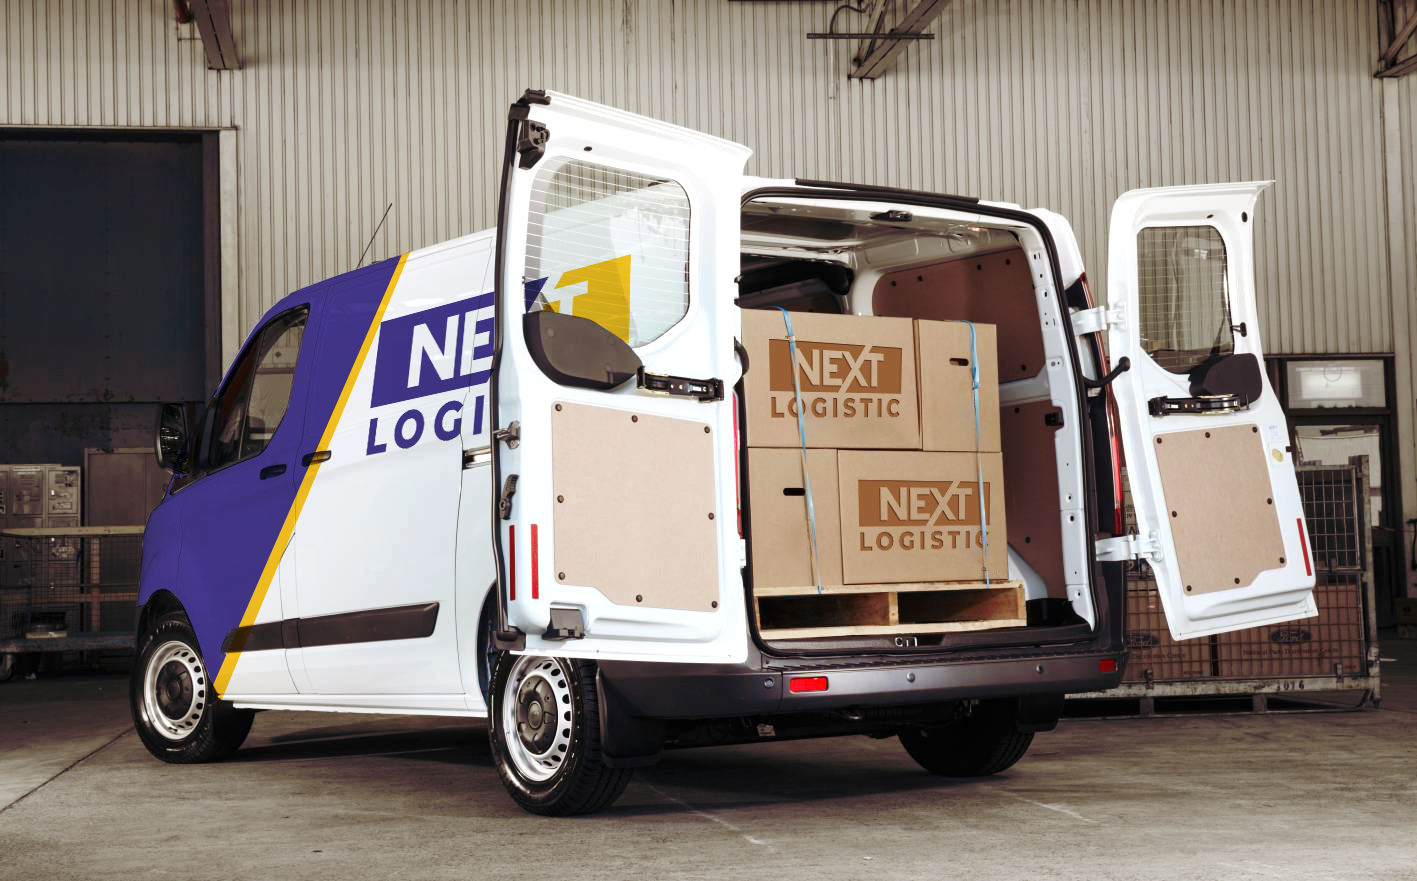 Nextlogistic Van loaded with boxes tied to a pallet